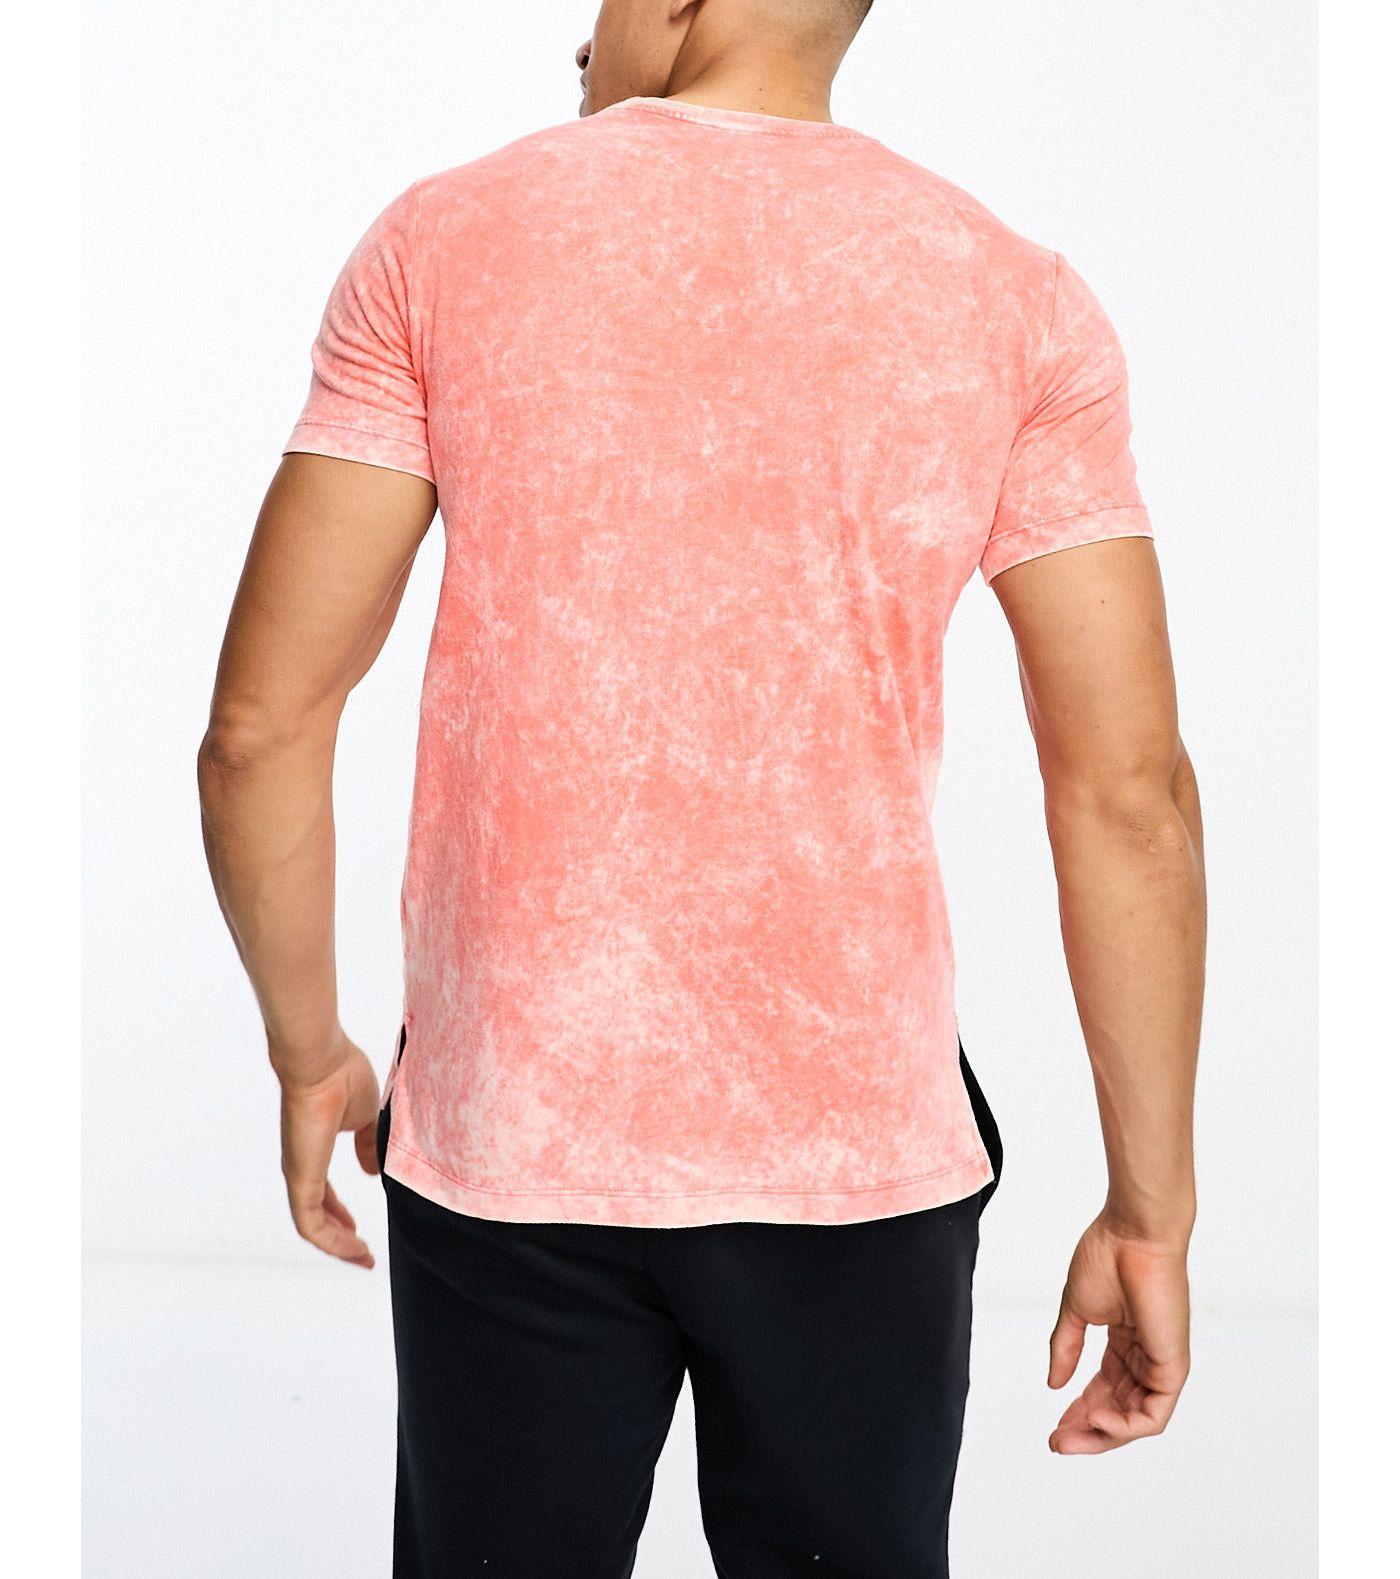 Under Armour Run Everywhere printed t-shirt in red